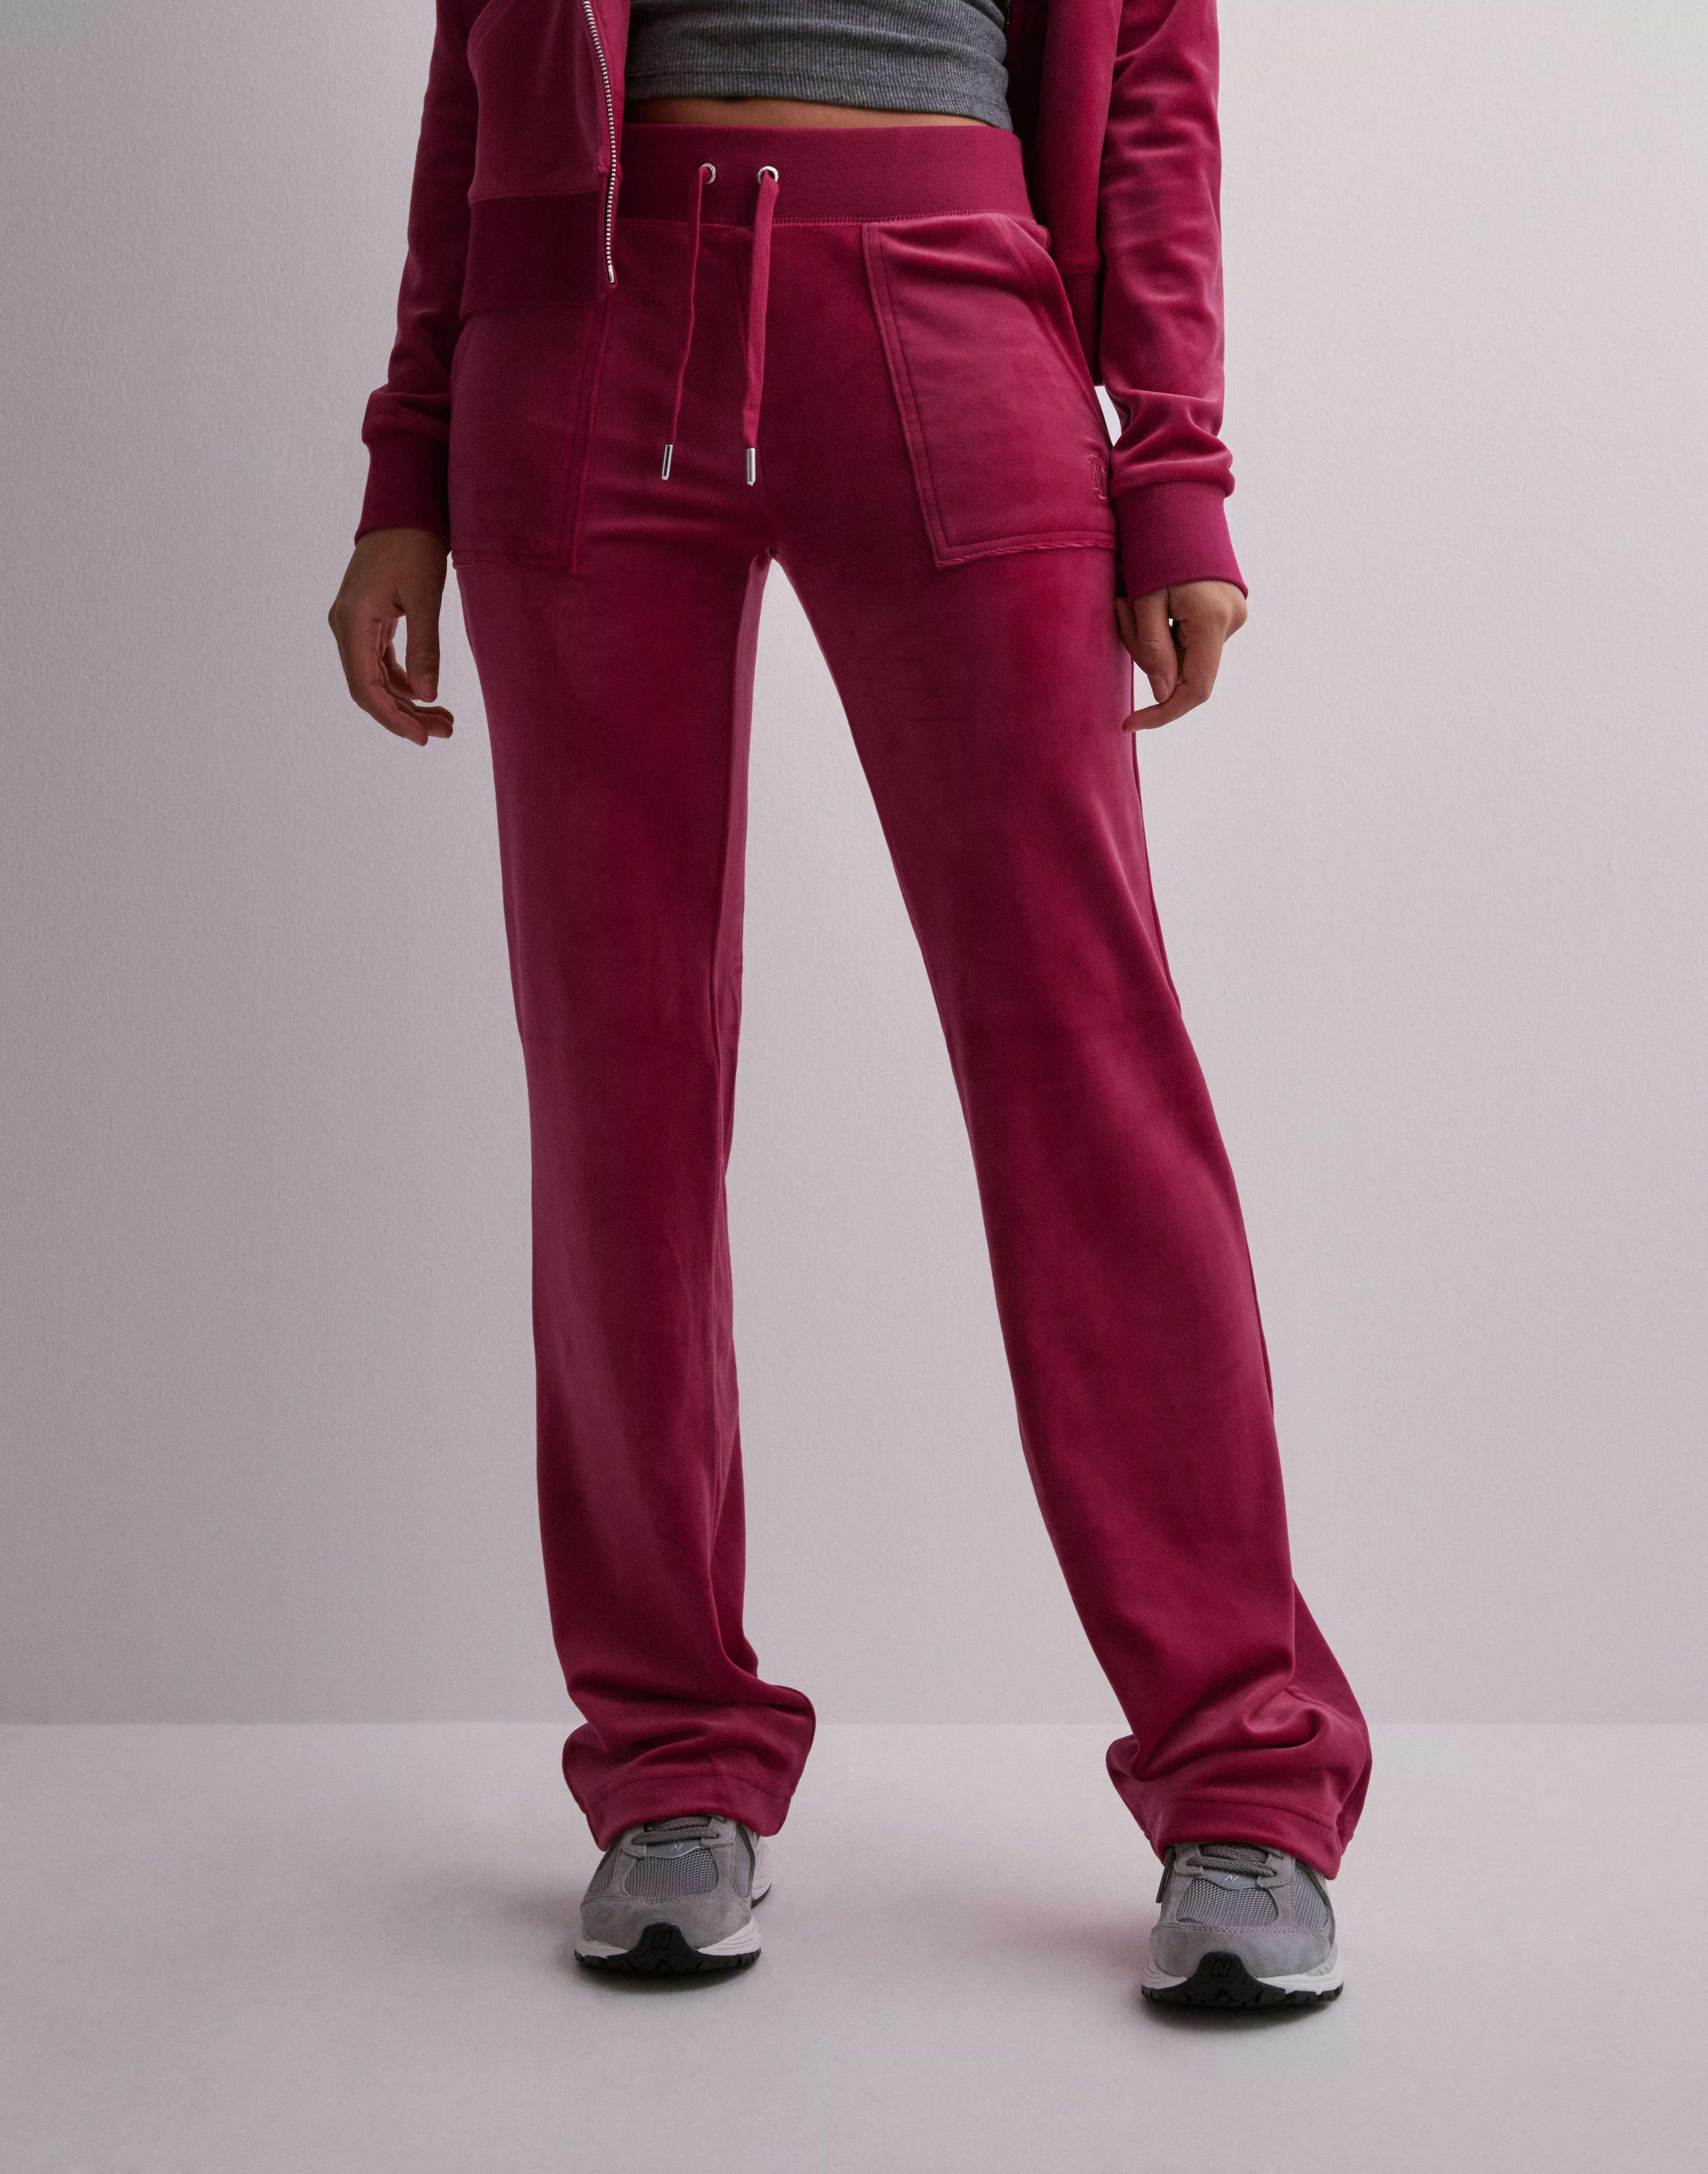 Juicy Couture Maroon Tracksuit